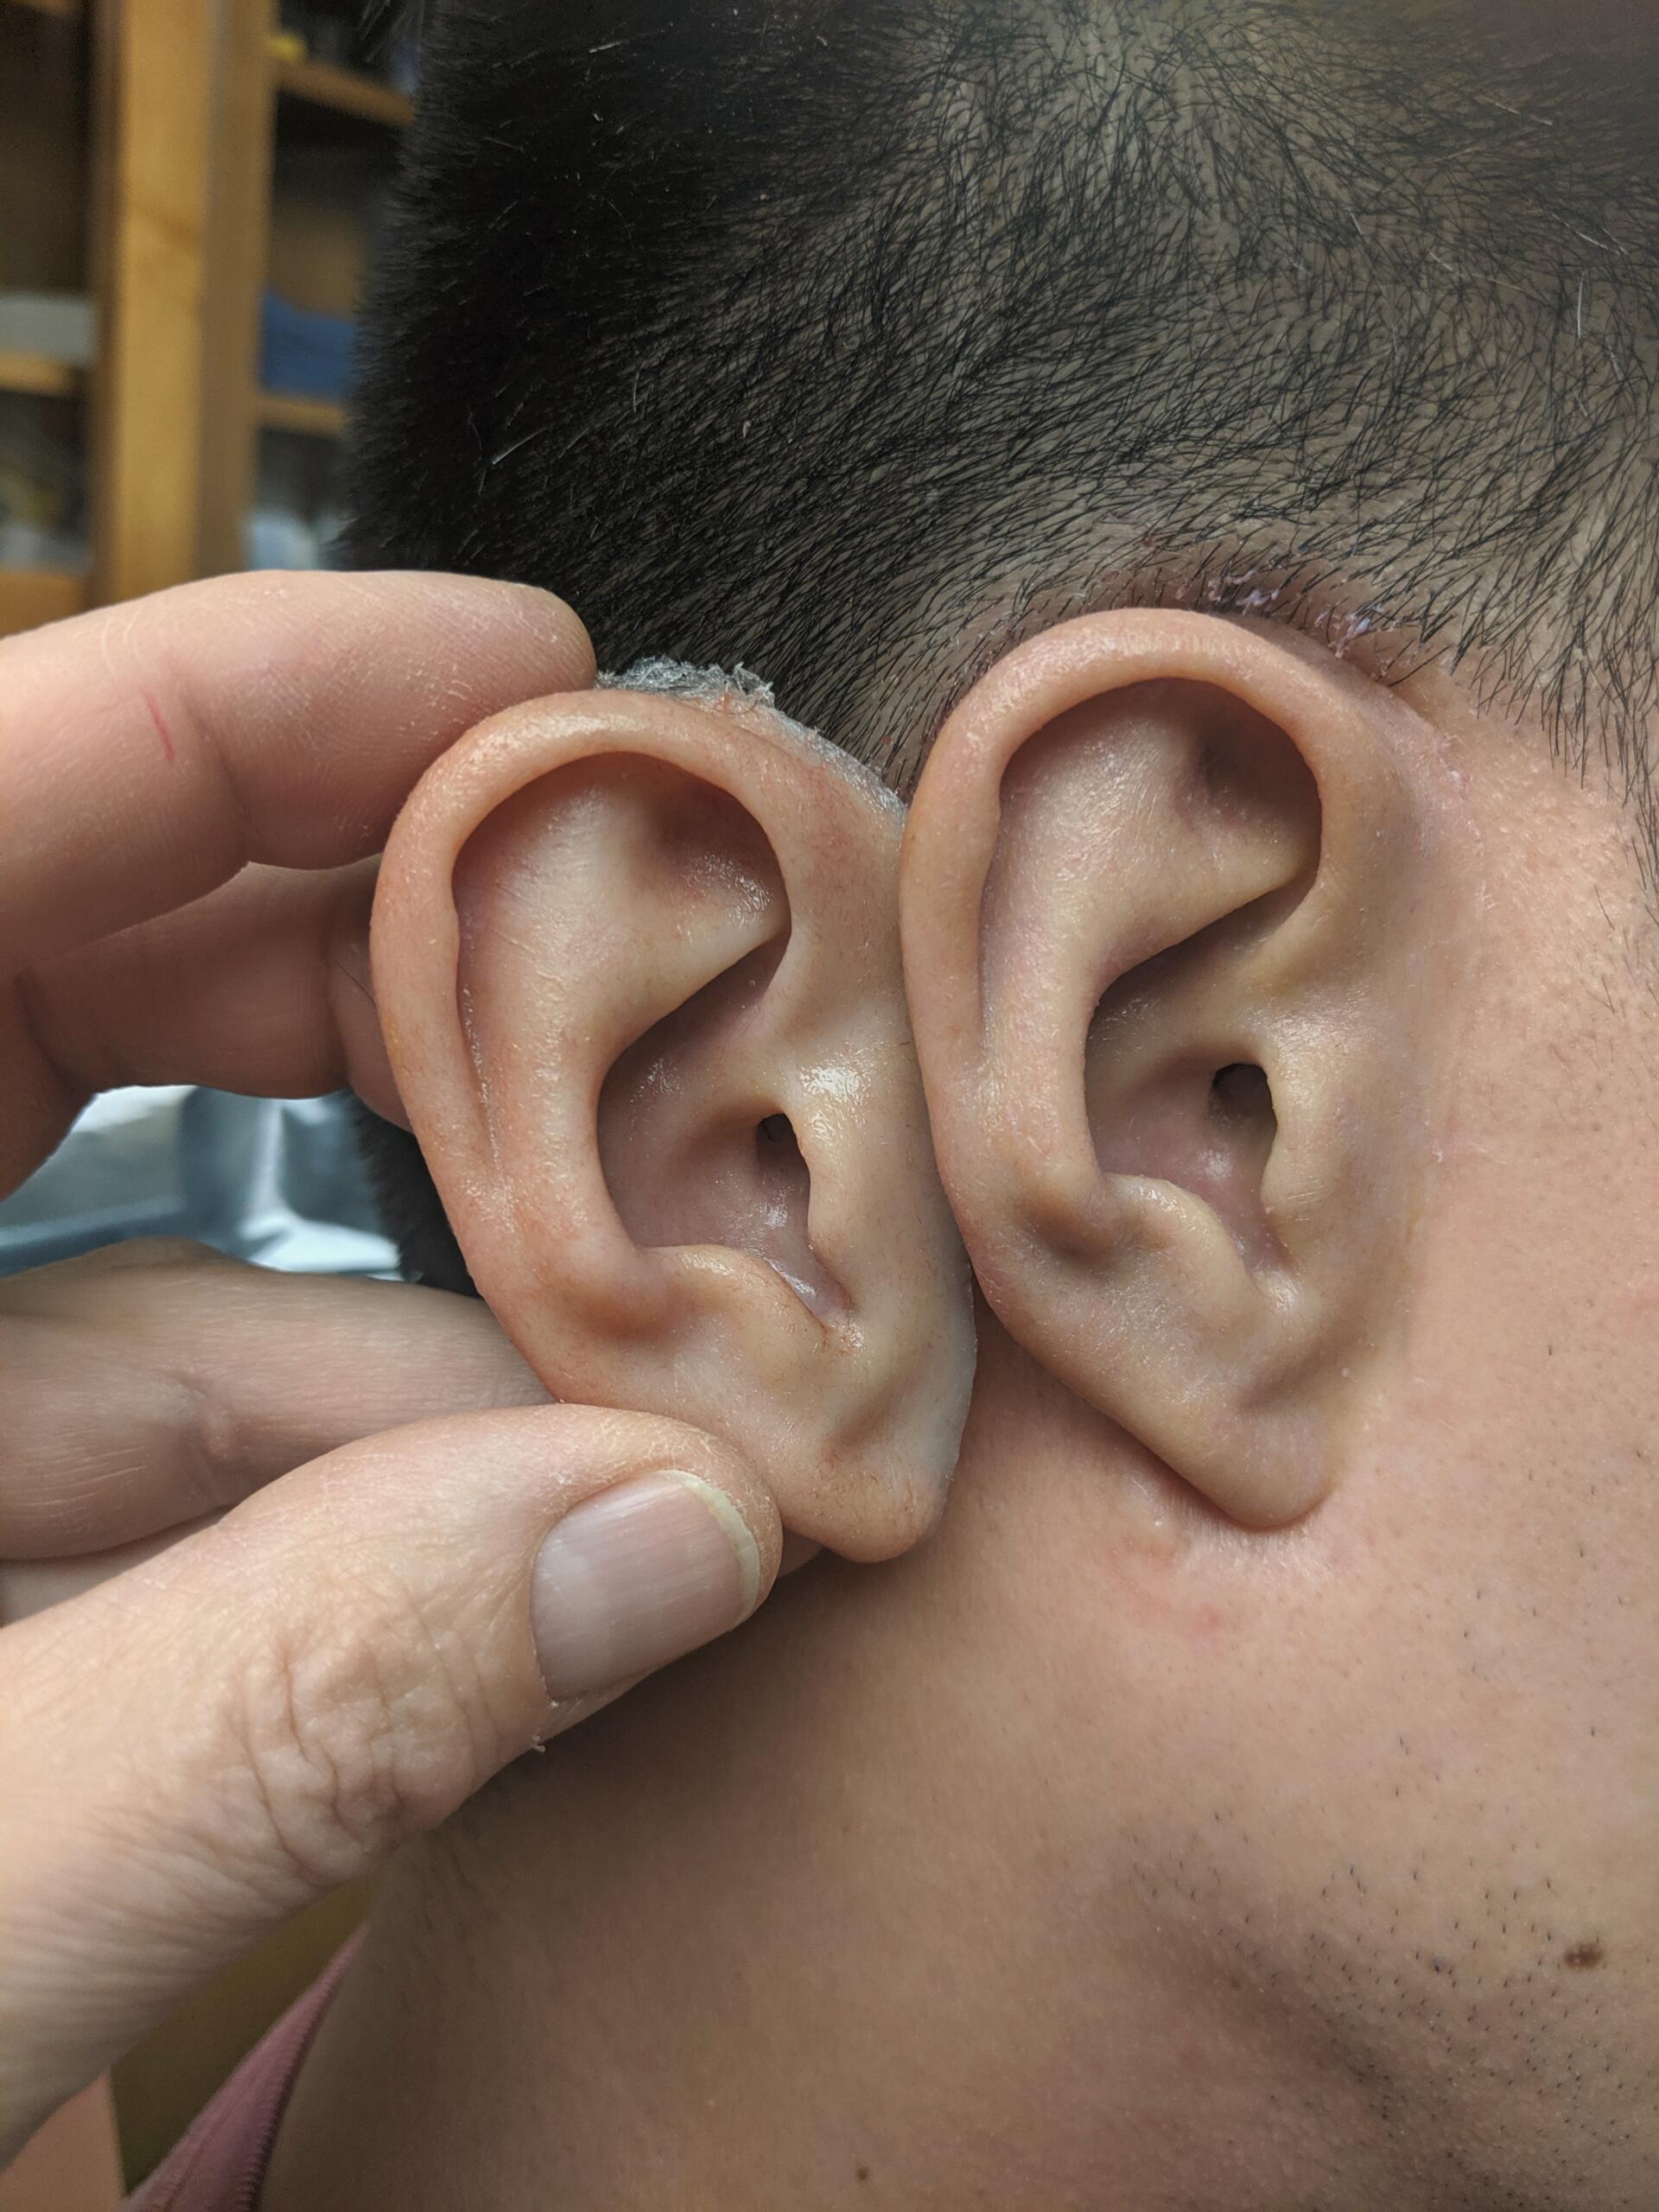 Close up of a fresh replacement implant-retained ear prosthesis in place on Aisian man, and his older prosthesis that was retinted held close for comparison.